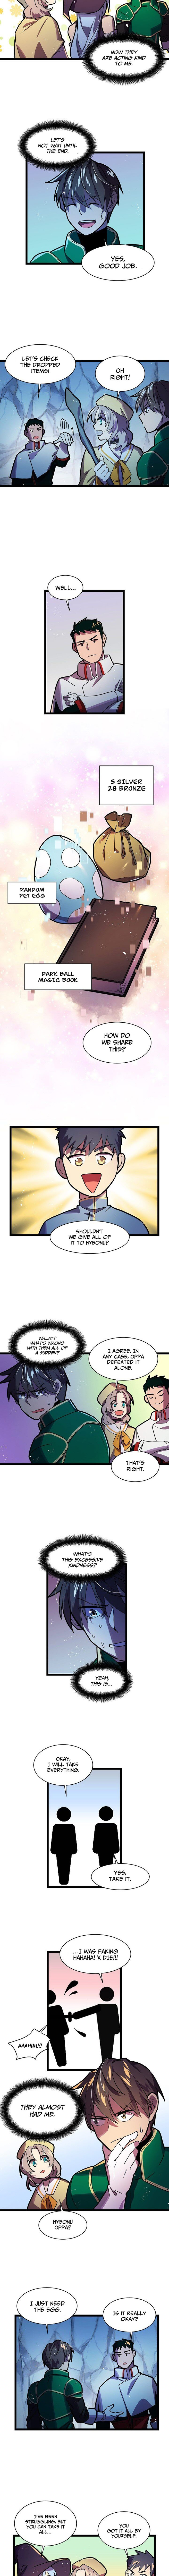 Ranker’s Return - Chapter 11 Page 6